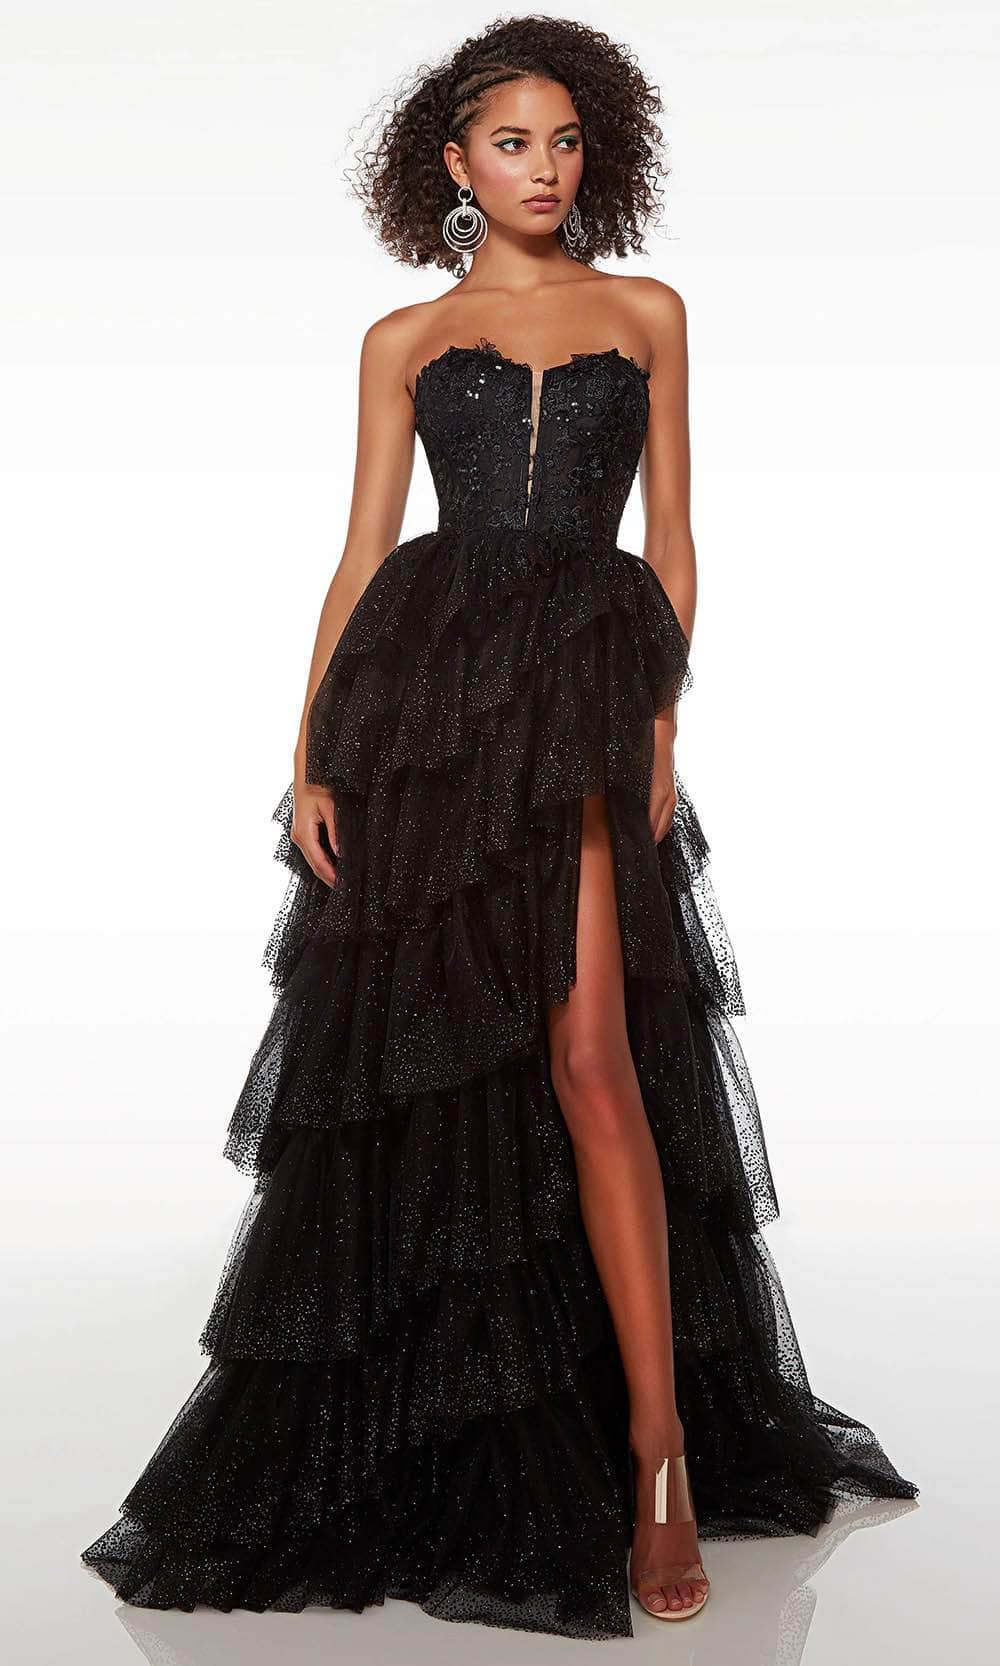 Alyce Paris 61525 - Strapless Ruffled Prom Gown Special Occasion Dress 000 / Black